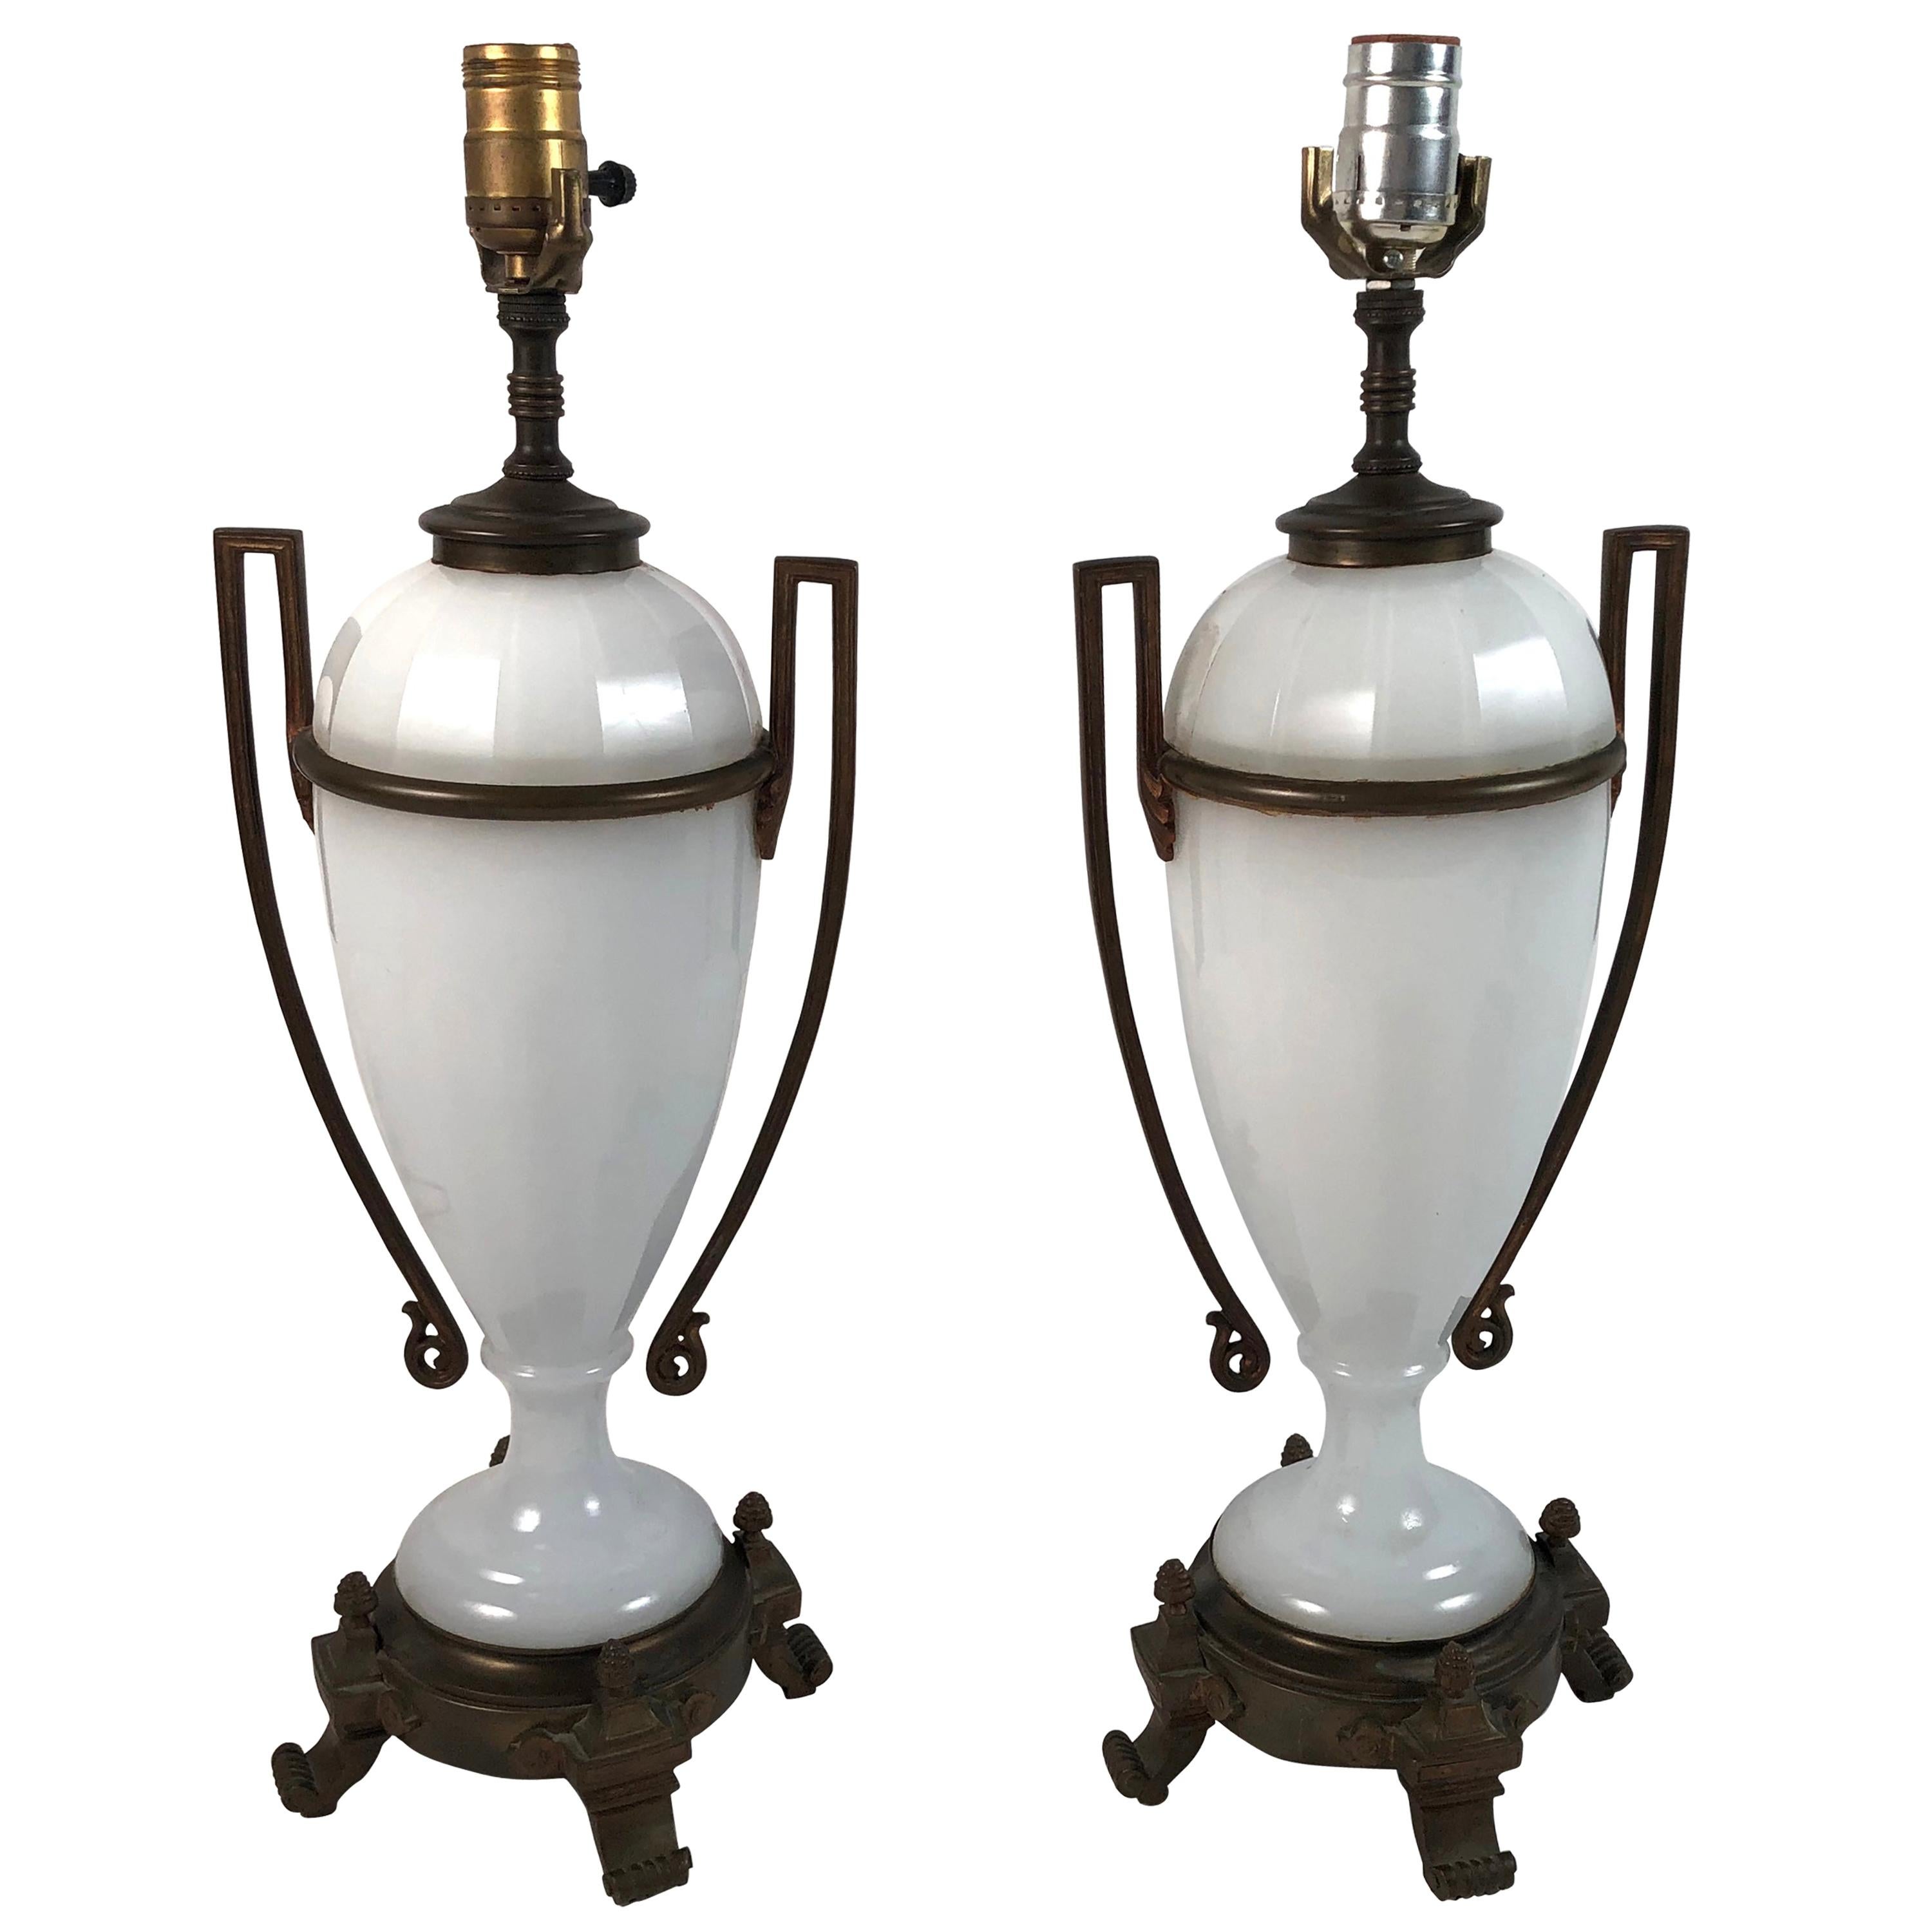 A pair of Louis XVI style neoclassical white opaline glass and ormolu lamps, each vase with stylized rectangular strap ormolu handles, the vases mounted on ormolu bases with pine cone finials. Newly re-wired. Shades shown for display only.

Base